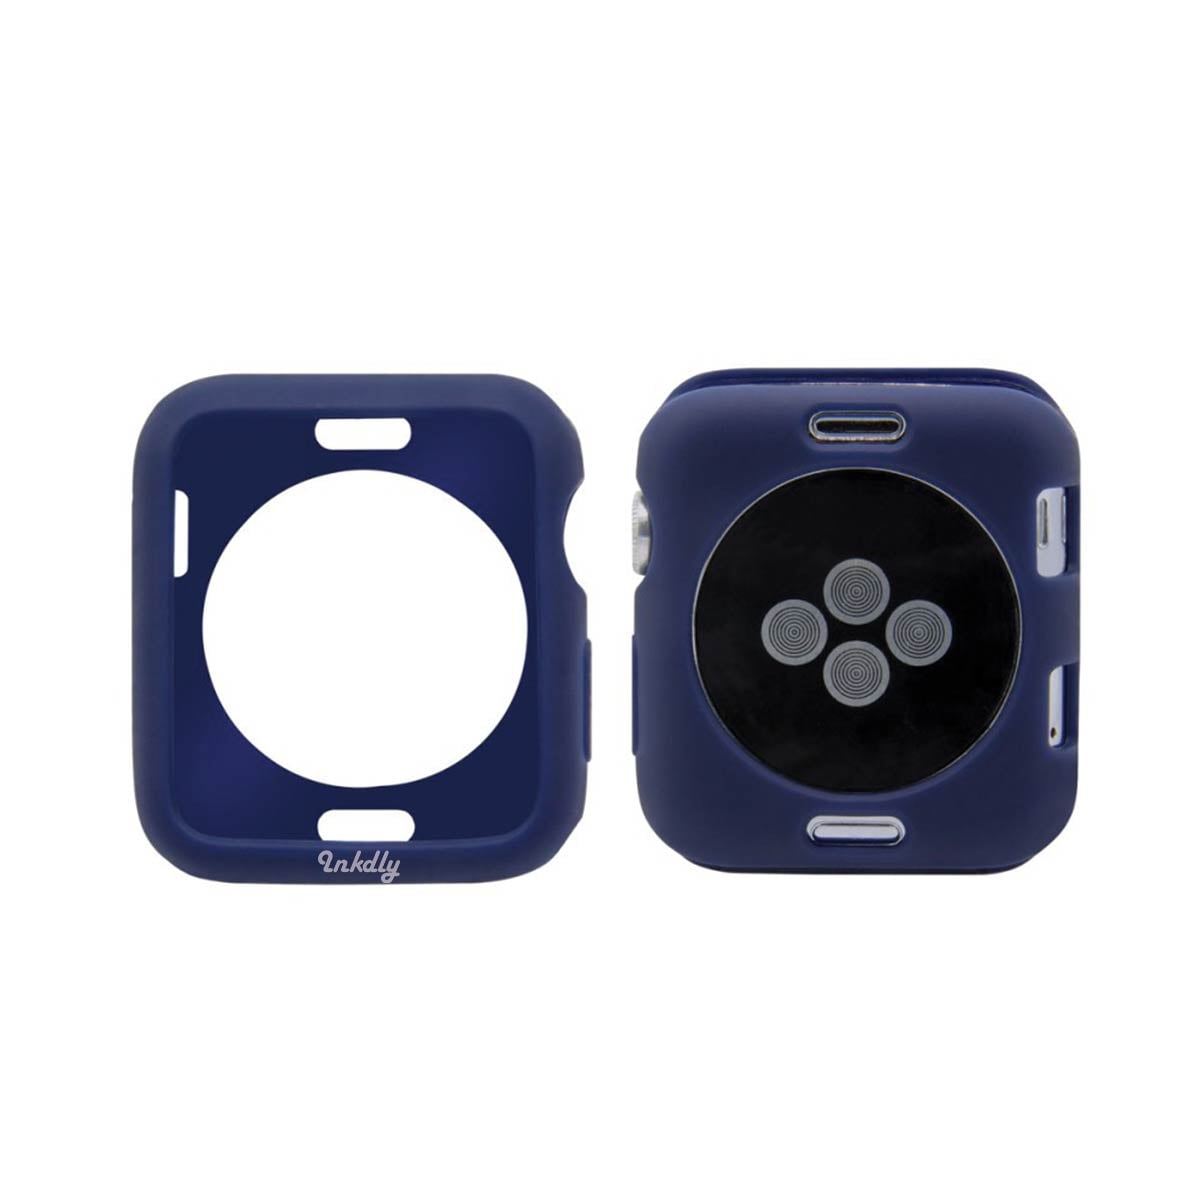 Pastel Apple Watch Protective Case Cover Navy Blue 38mm Series 1 & 2 & 3